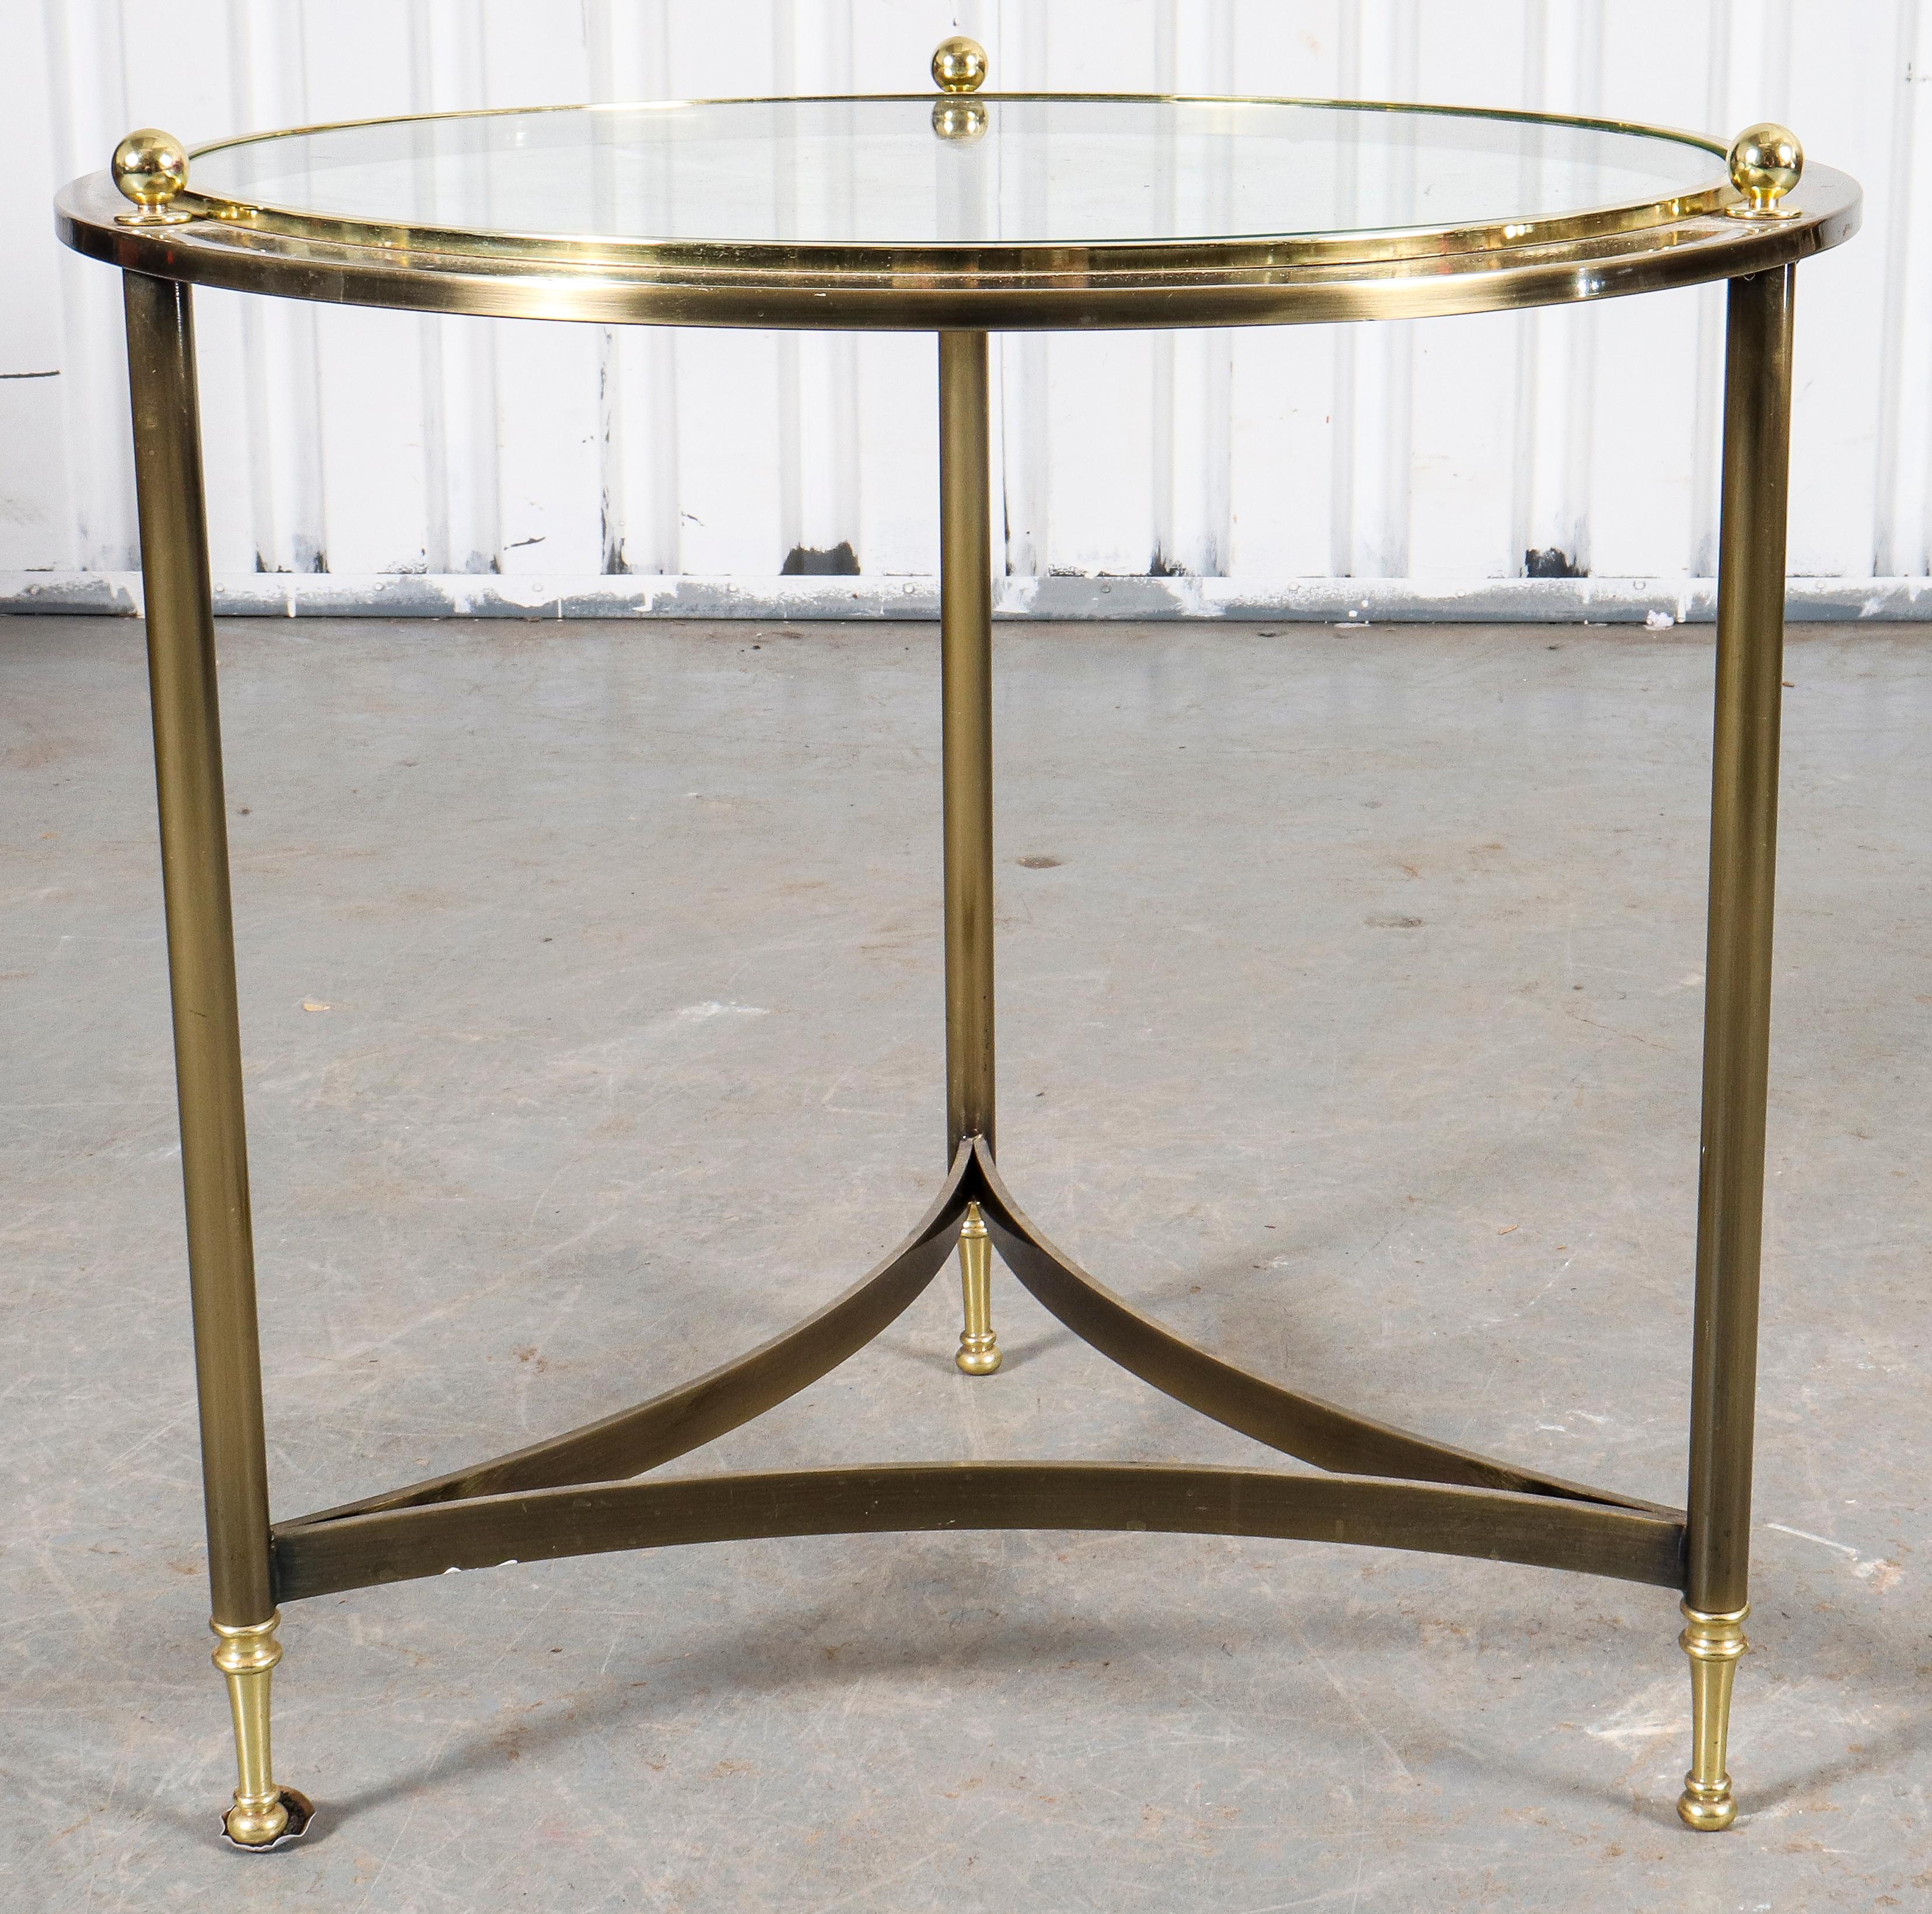 Maison Jansen manner round side table with metal tripod frame and glass top. Measures: 24